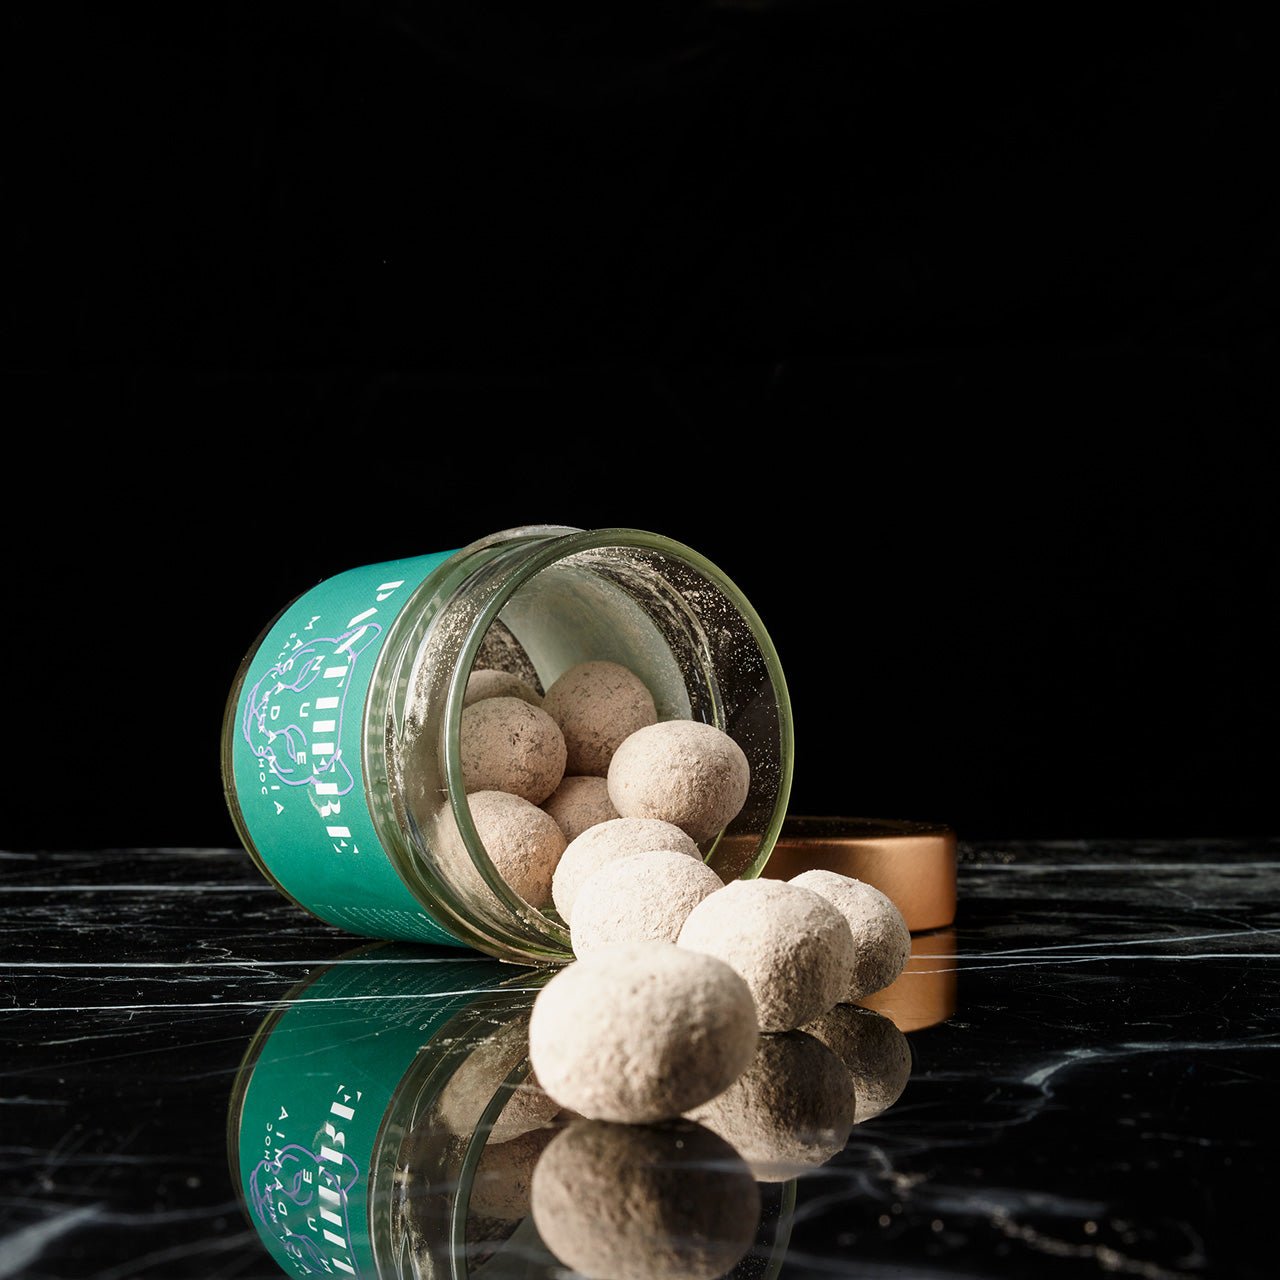 Macadamia by PANTHÈRE NUE – Double Trouble - Macadamia by PANTHÉRE NUE